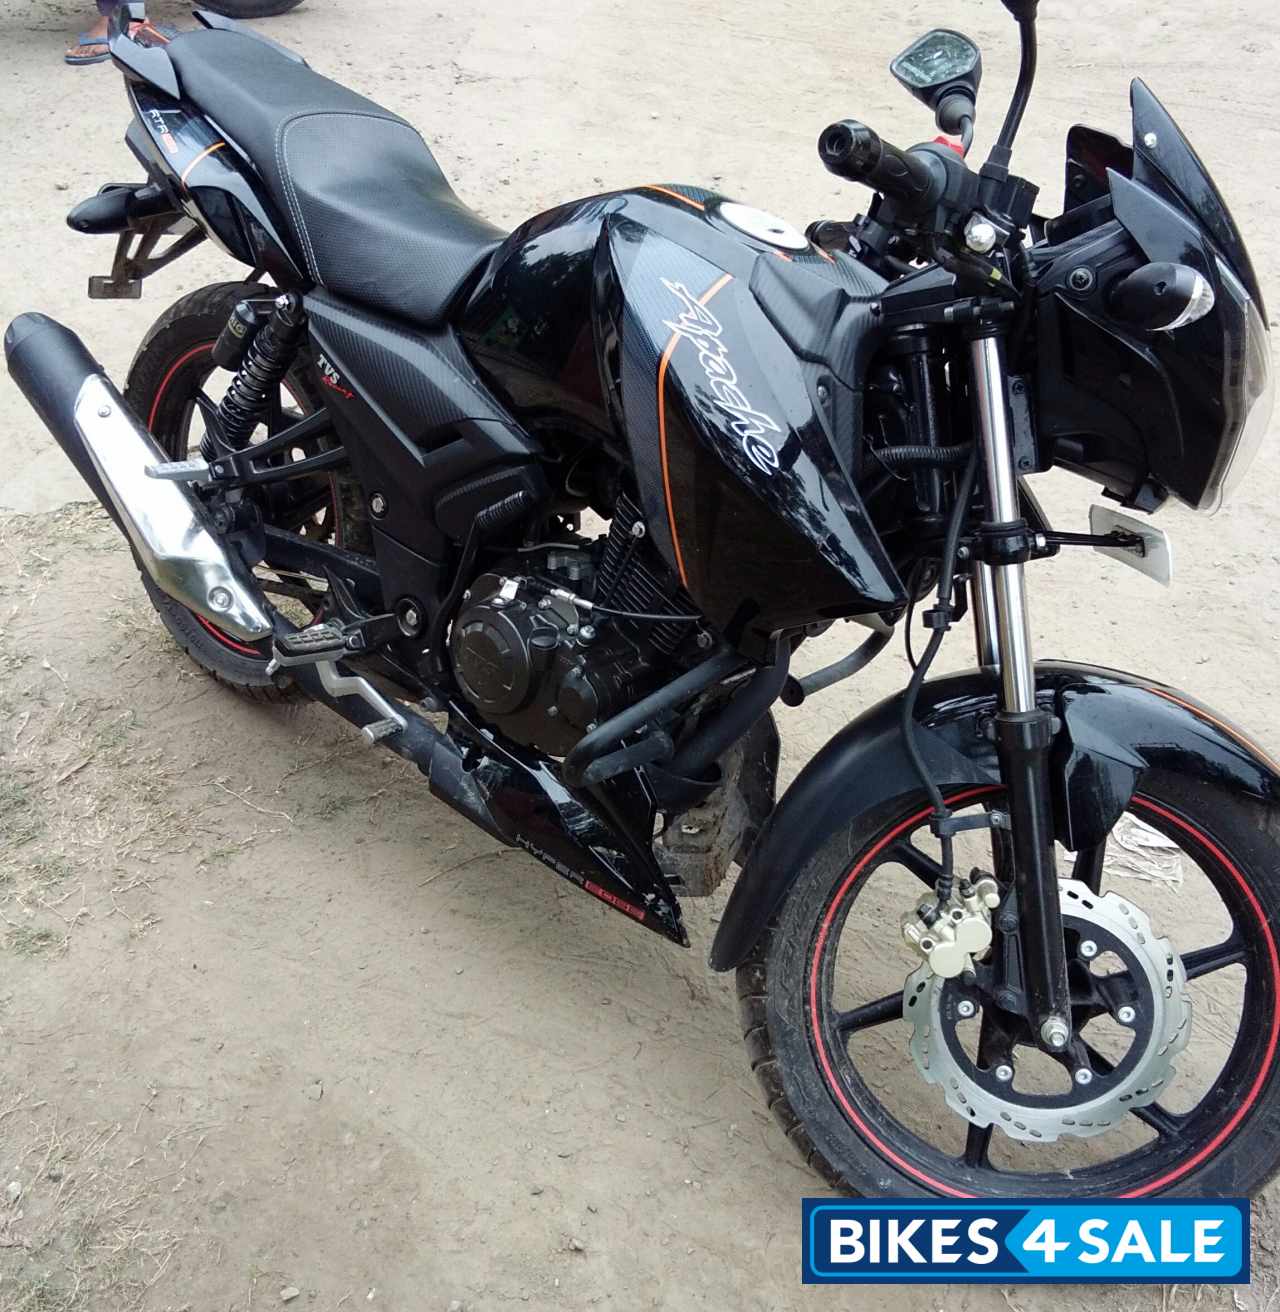 Used 2016 Model Tvs Apache Rtr 160 For Sale In Ambala Id 137034 Black Colour Bikes4sale